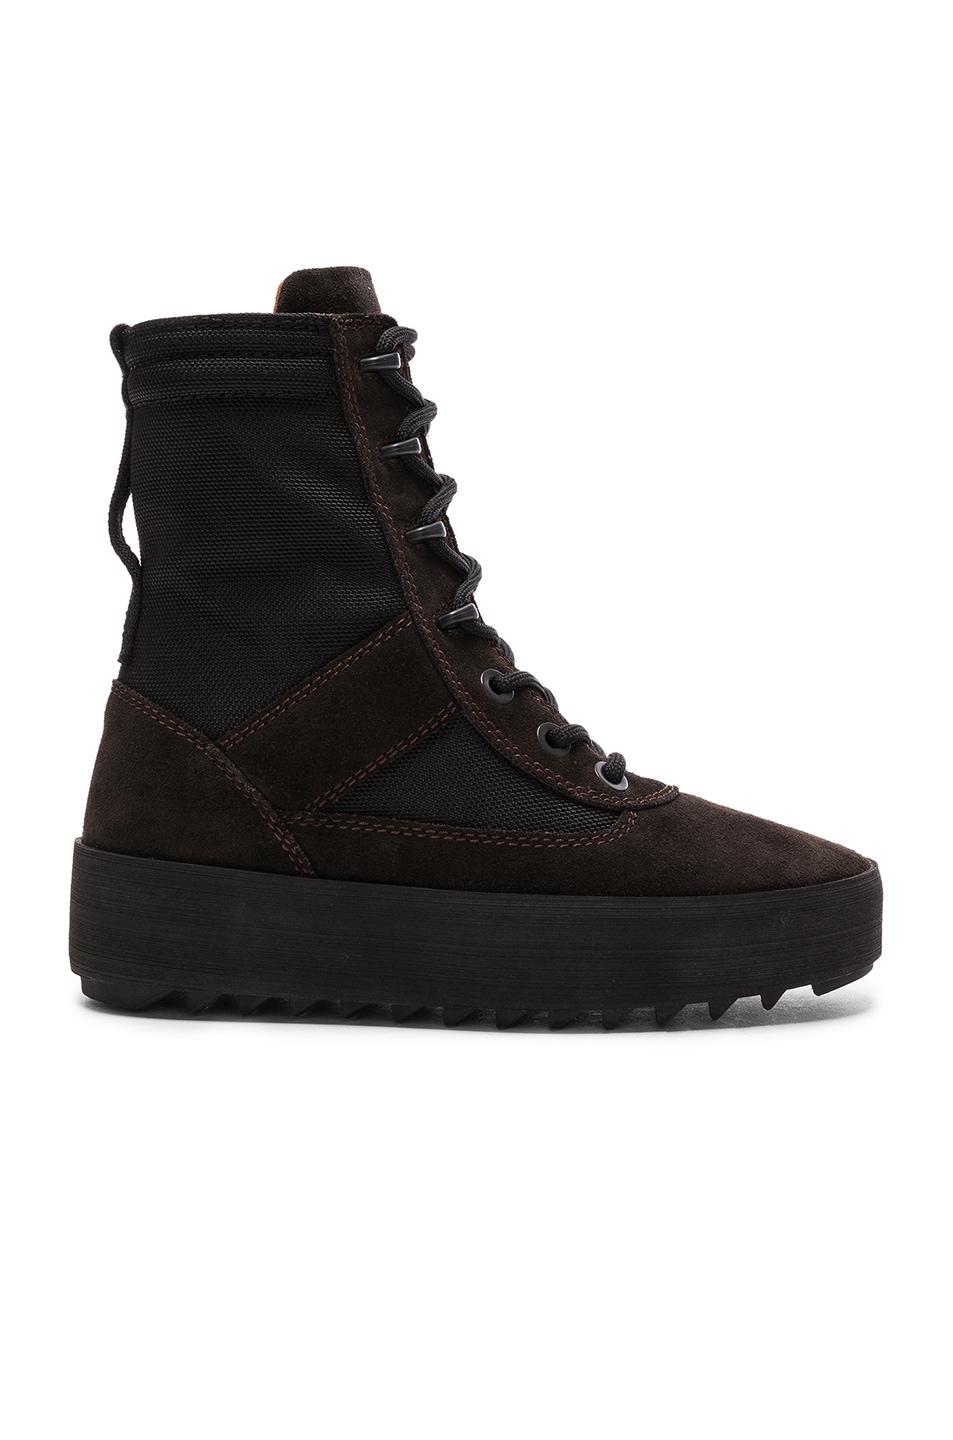 Image 1 of YEEZY Season 3 Suede Military Boots in Onyx Tame